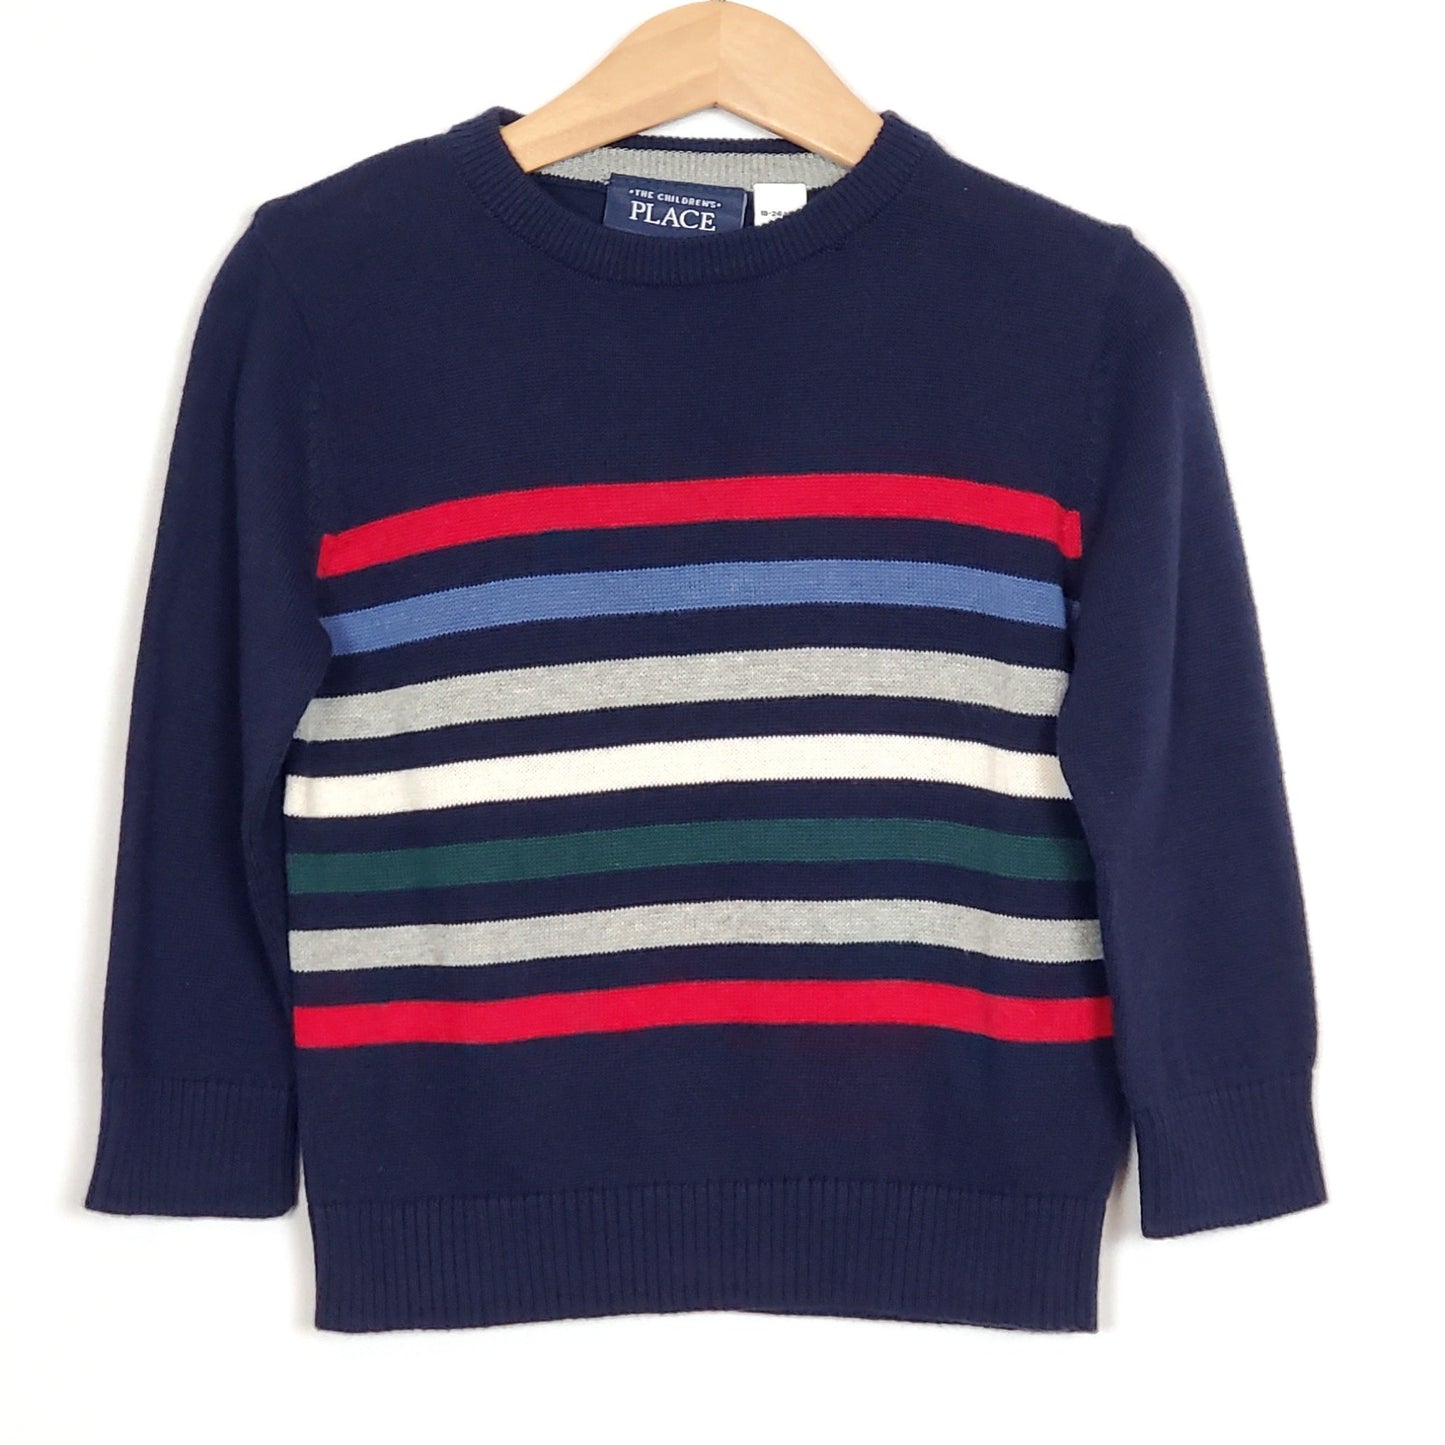 Childrens Place Boys Blue Striped Sweater 18 Months NWT View 1